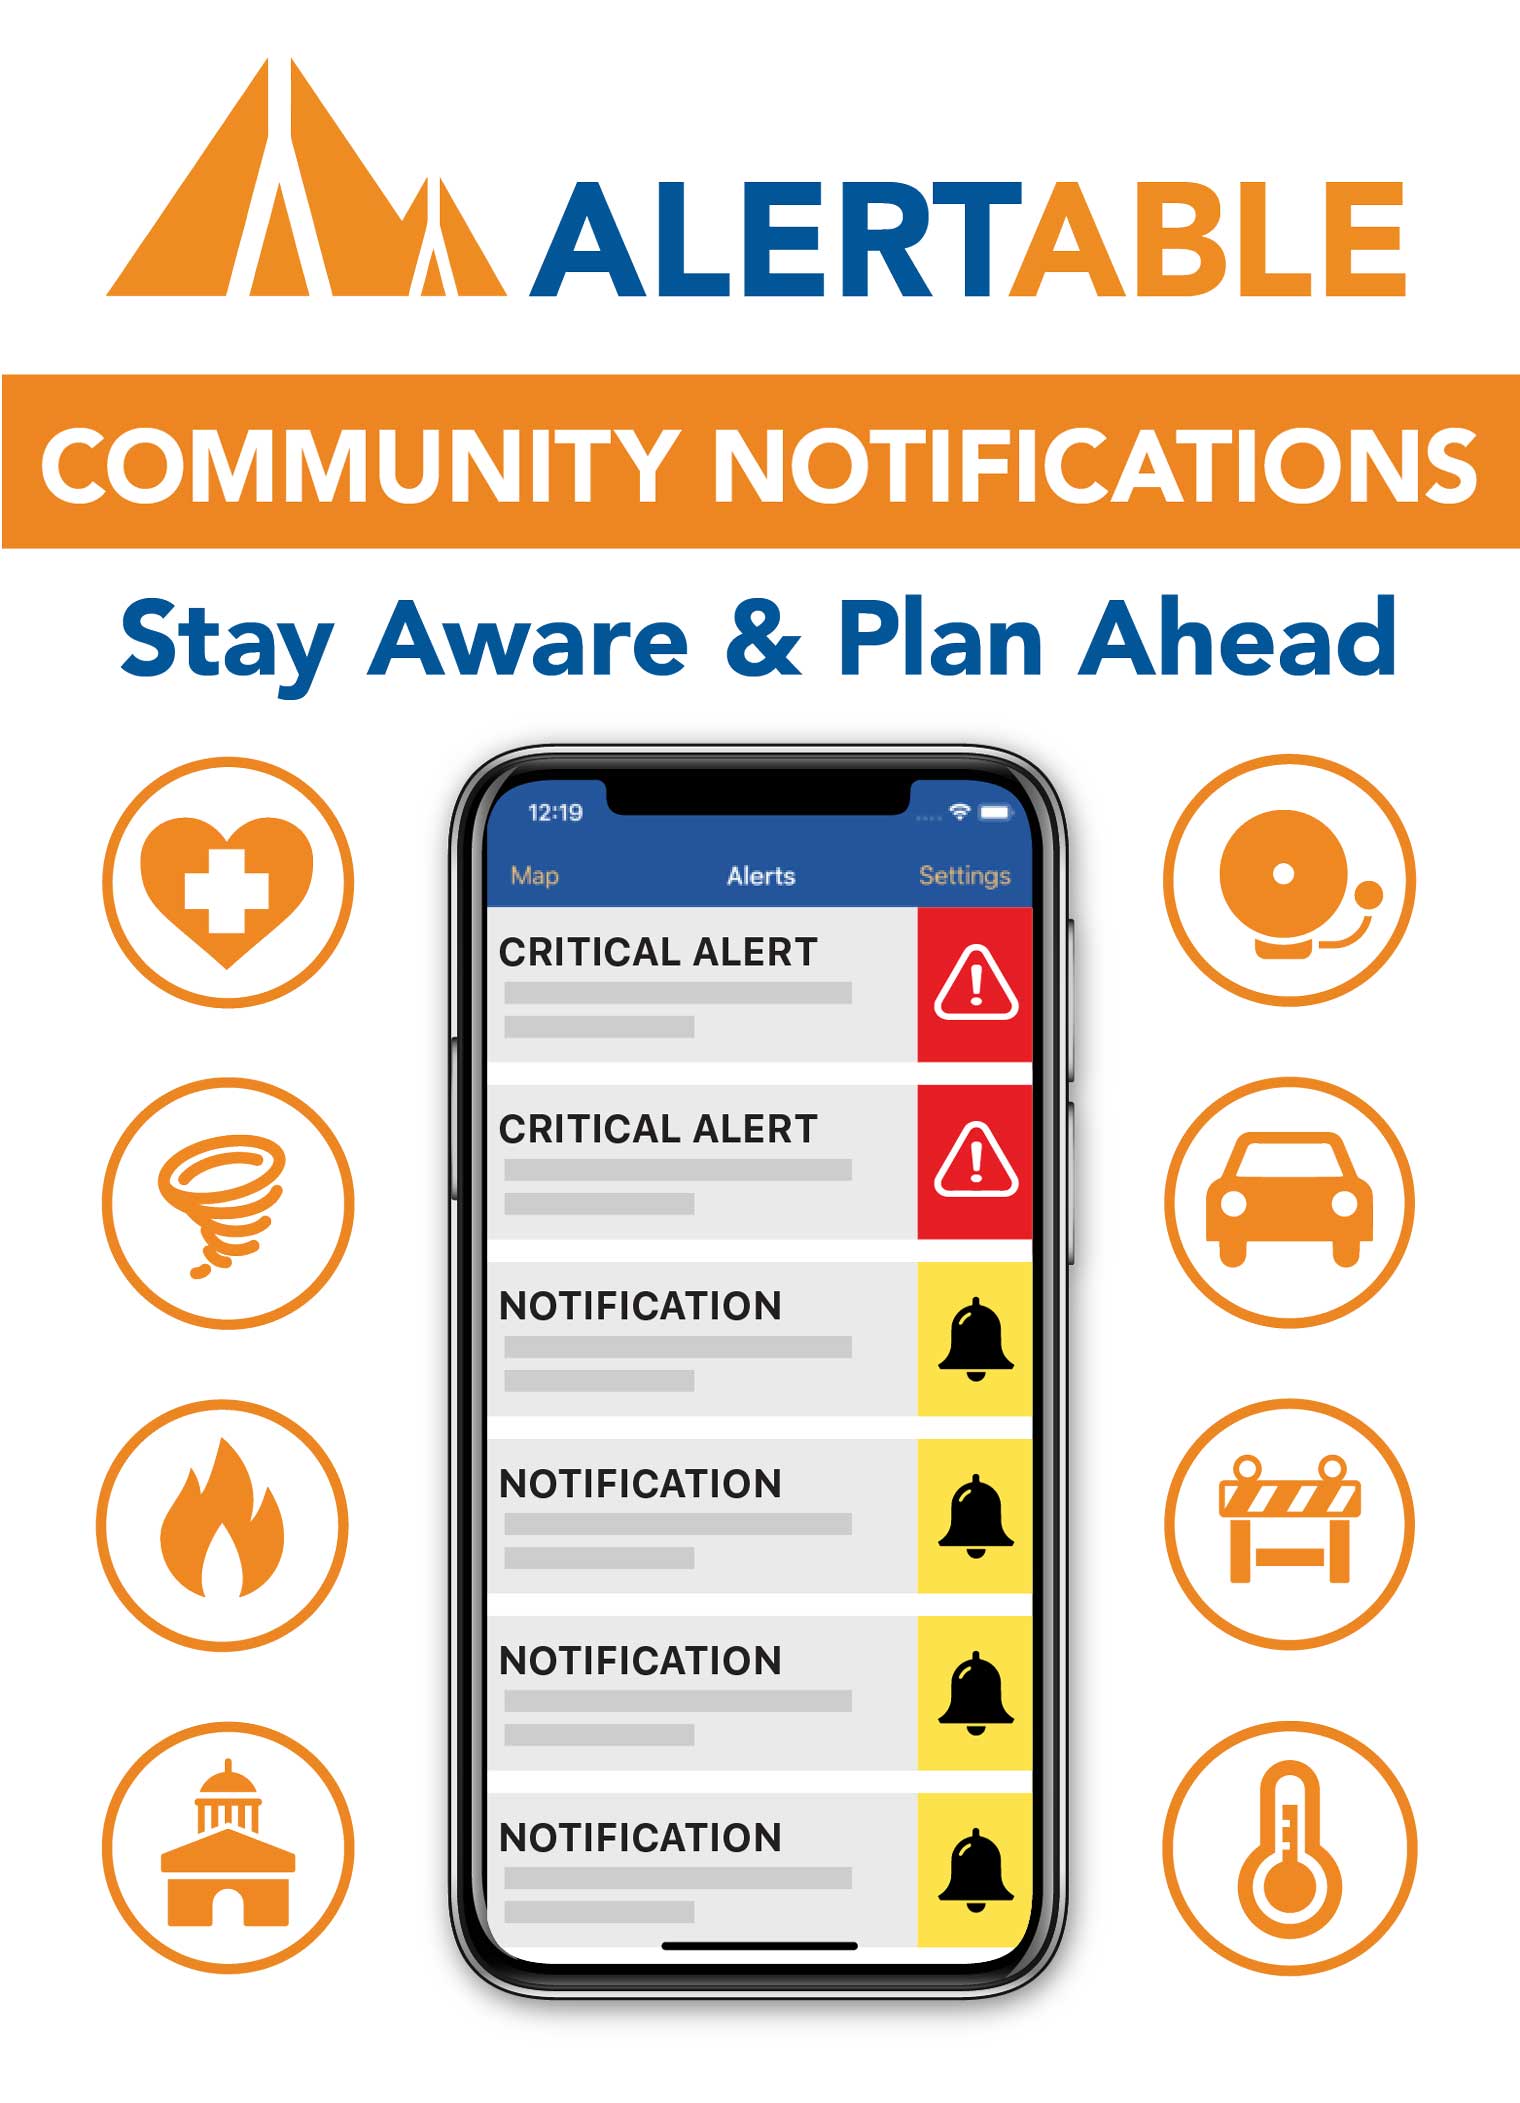 ALERTABLE - Sign Up Now - Community Notifications.